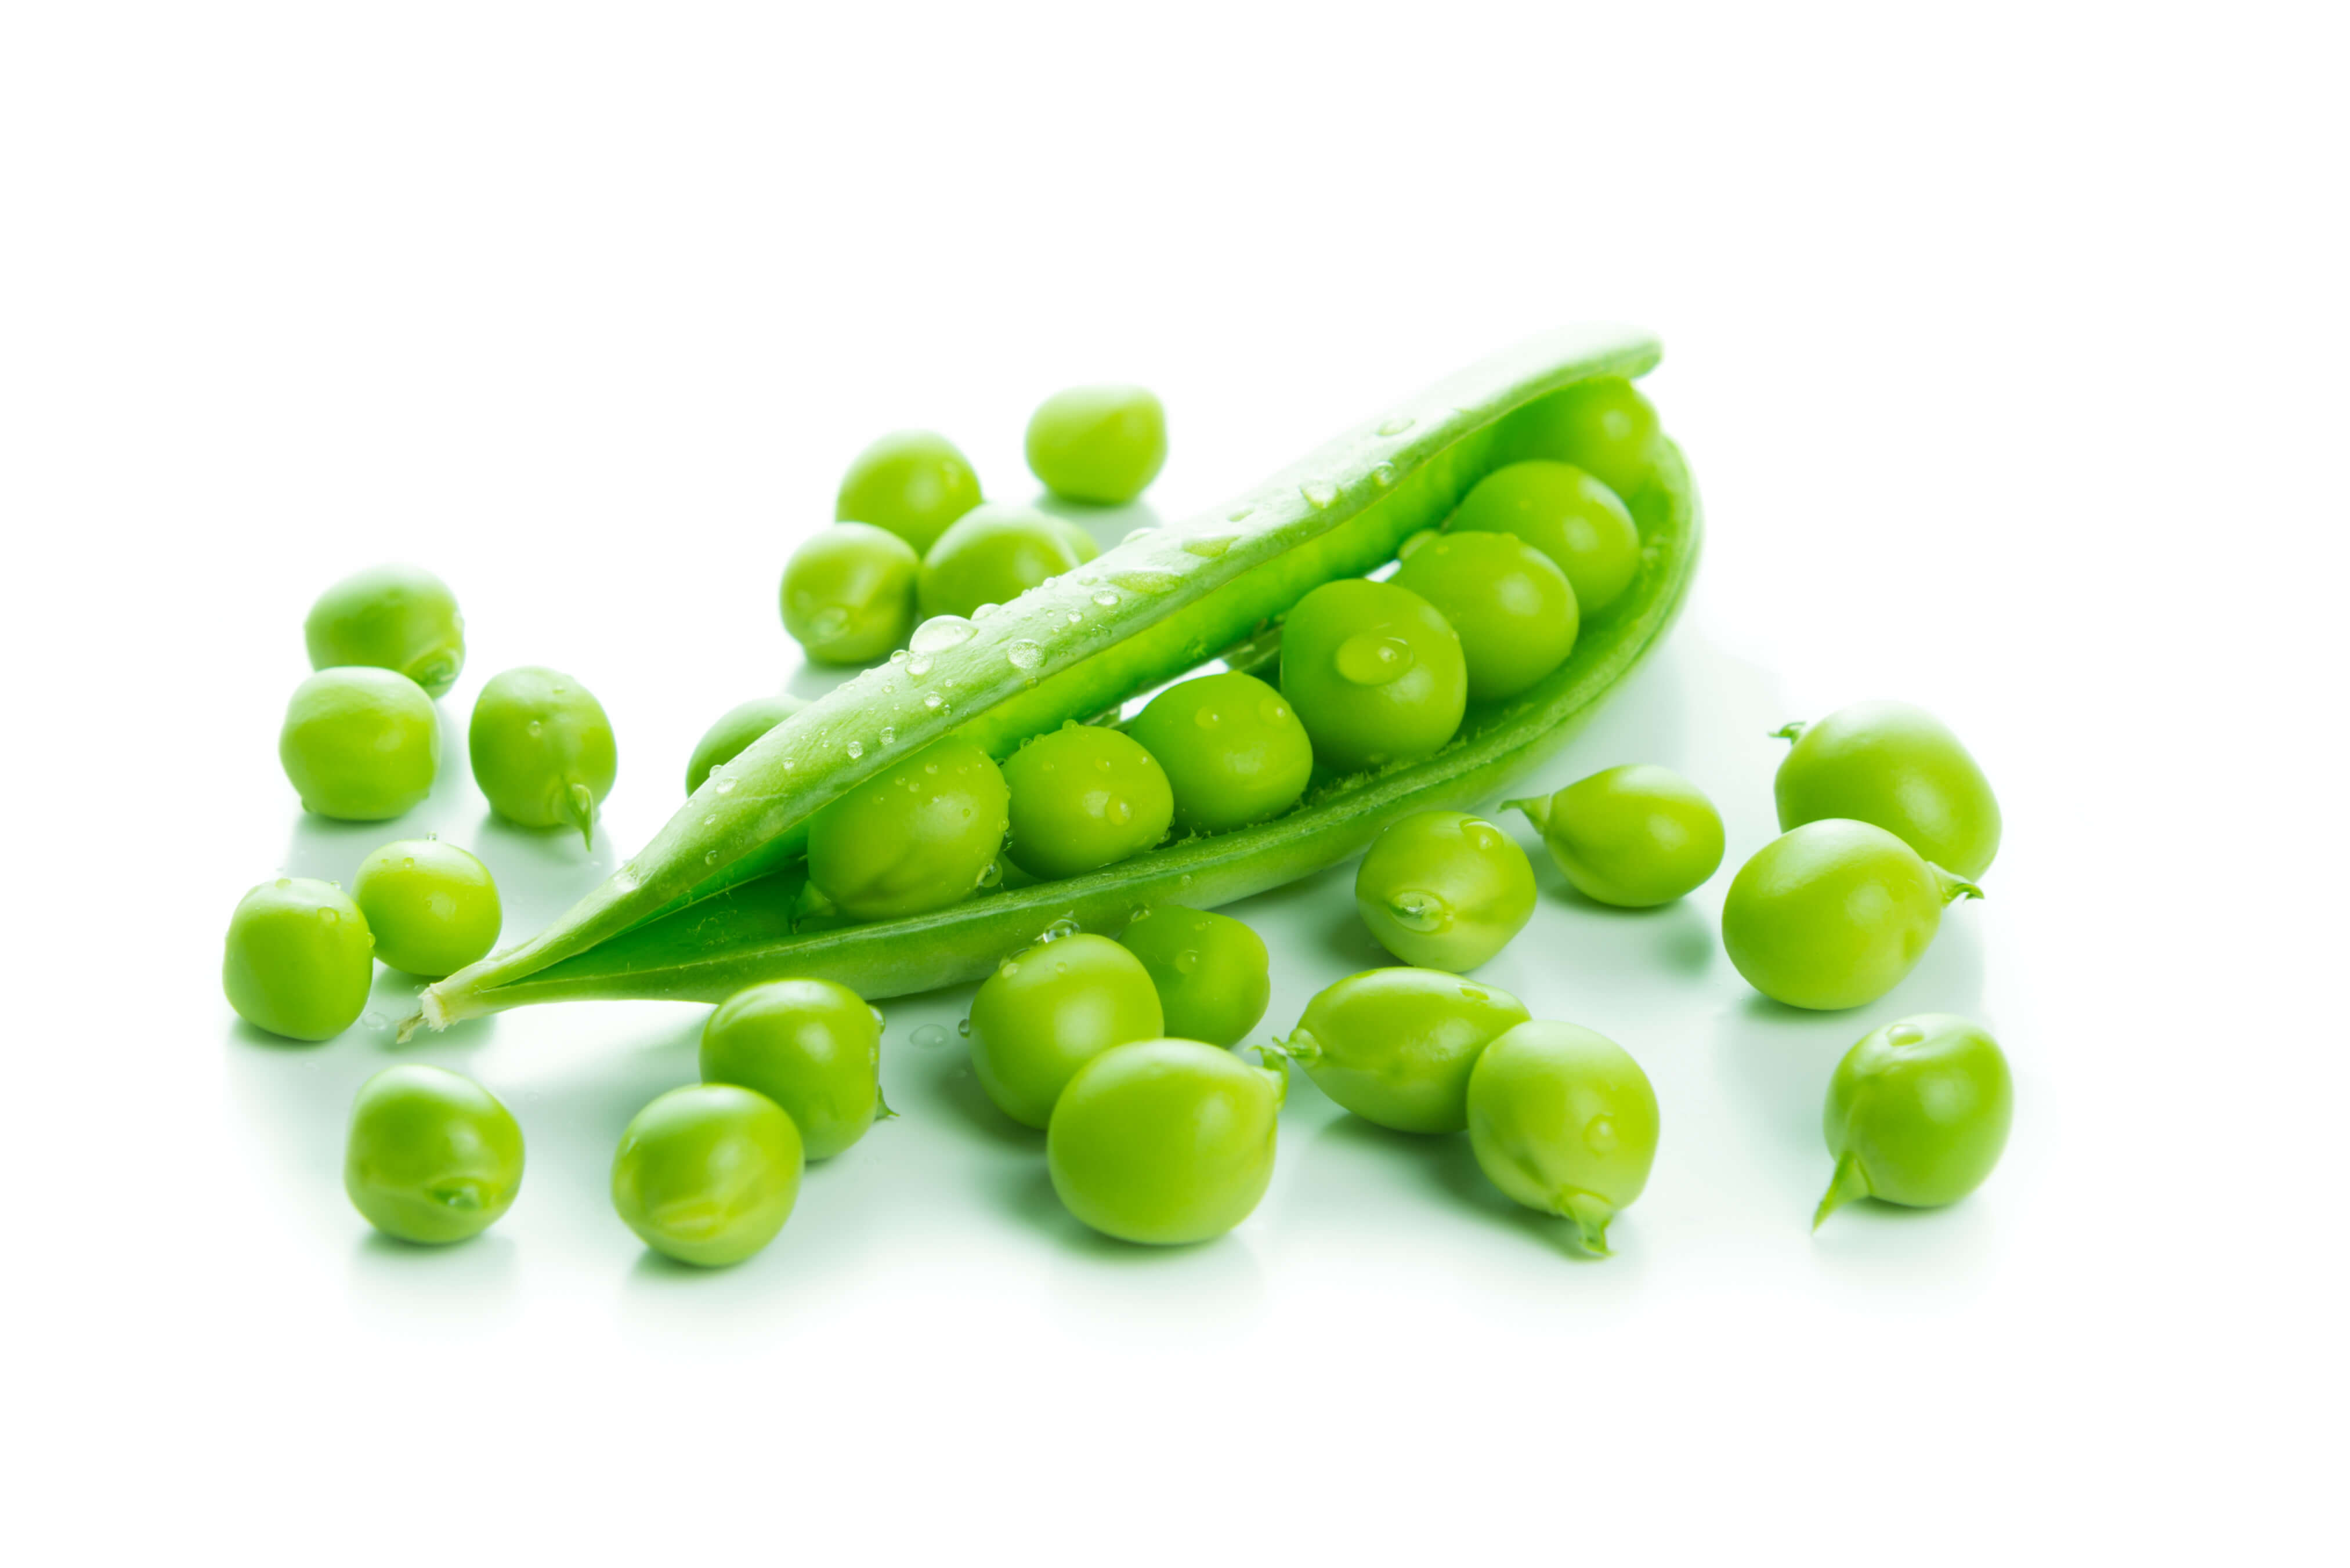 Peas on isolated white background with some seed out of pod